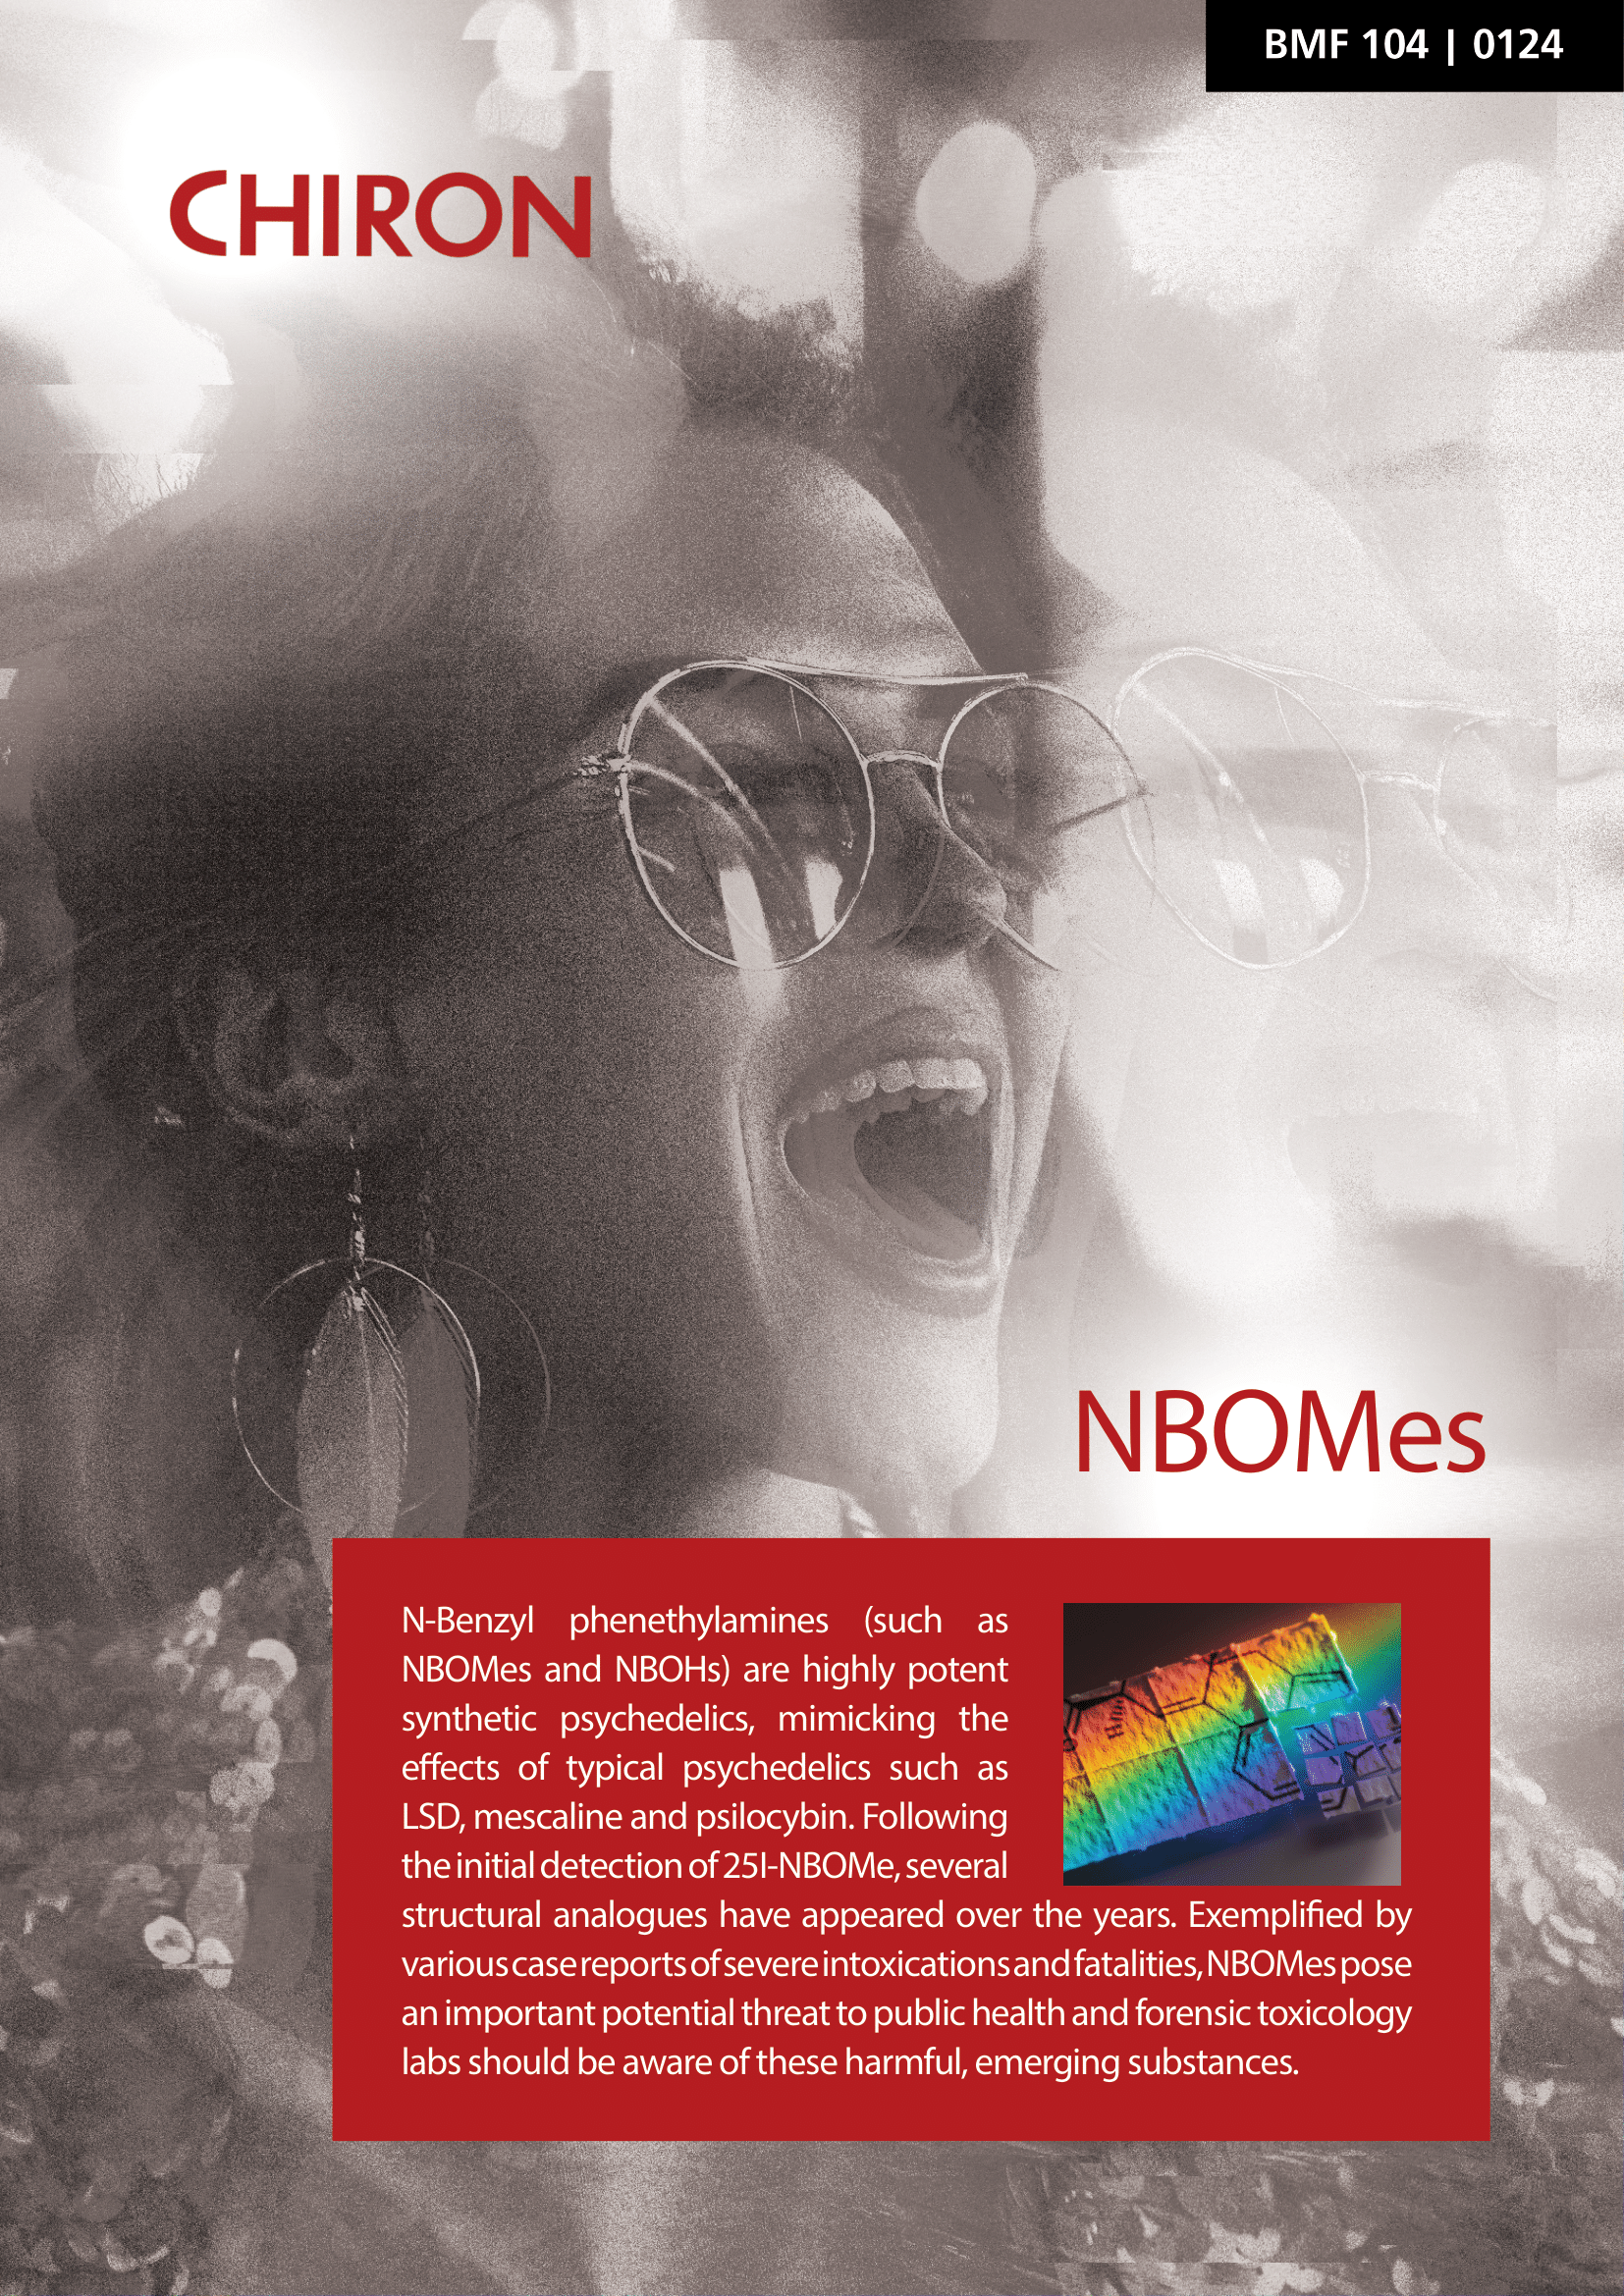 BMF 104 - NBOMes